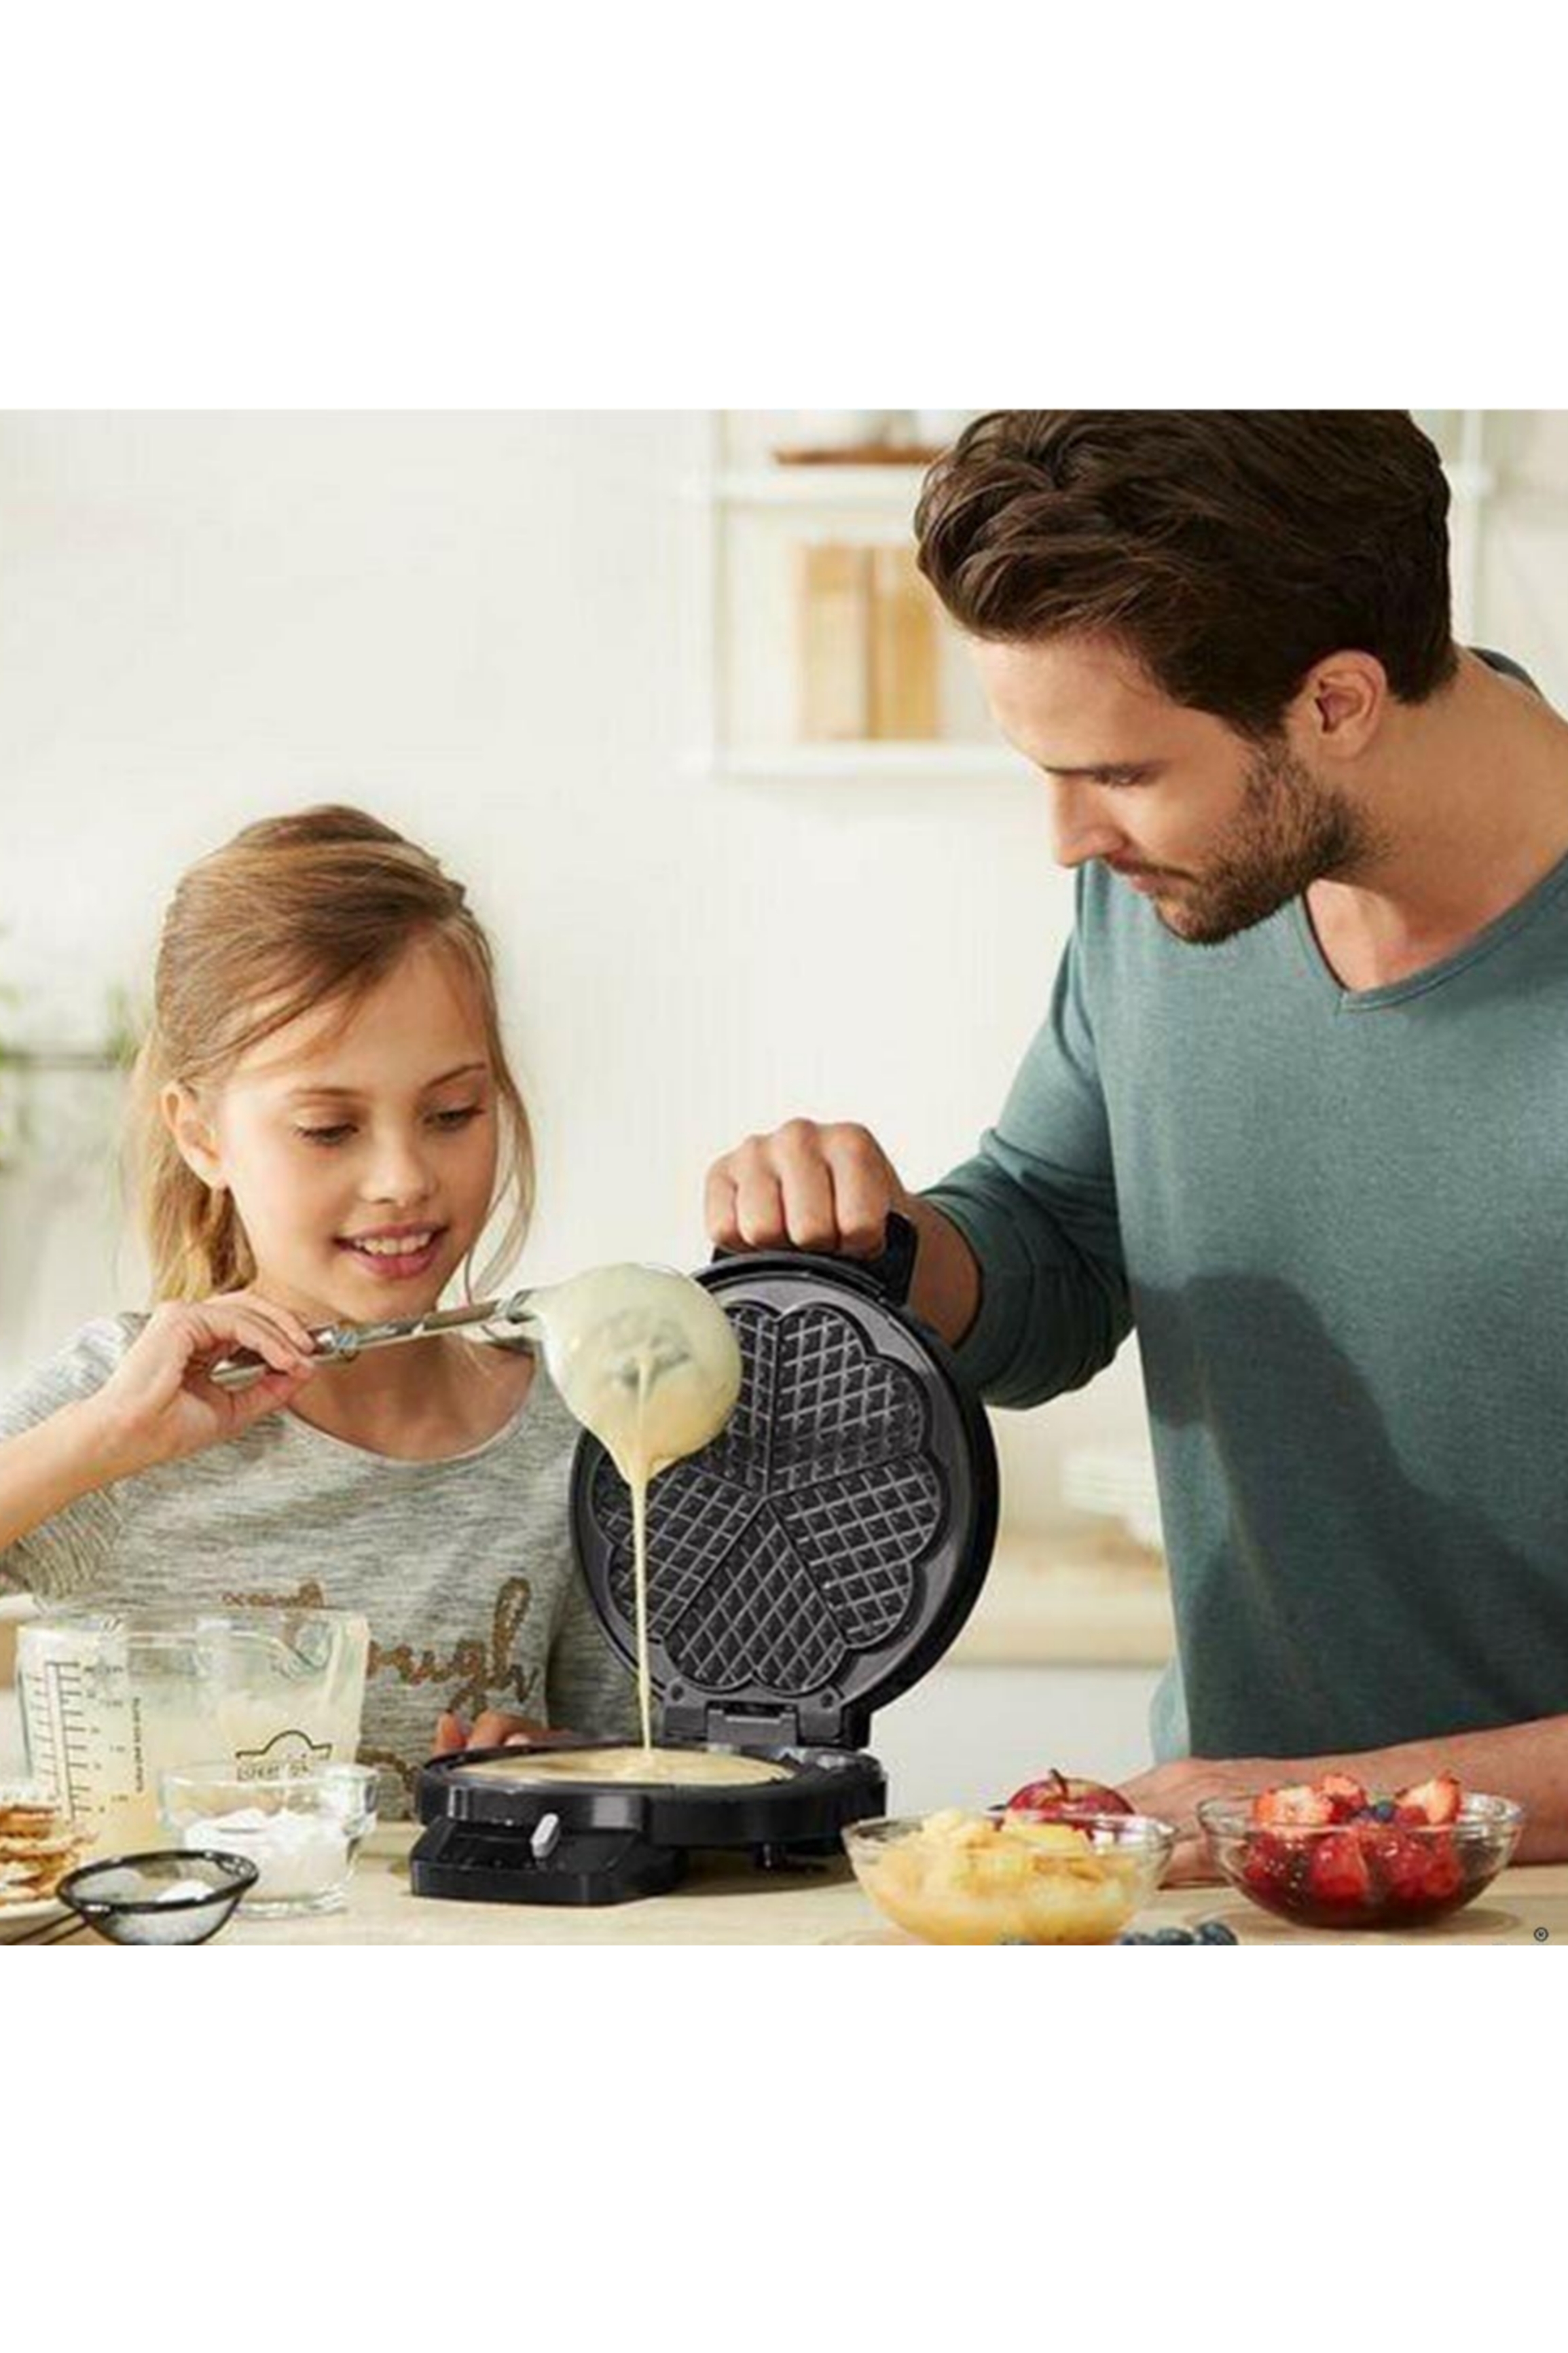 Silvercrest Waffle Maker Machine, Flower Shaped Non-Stick Coating With Deep Cooking Plates - 1200W